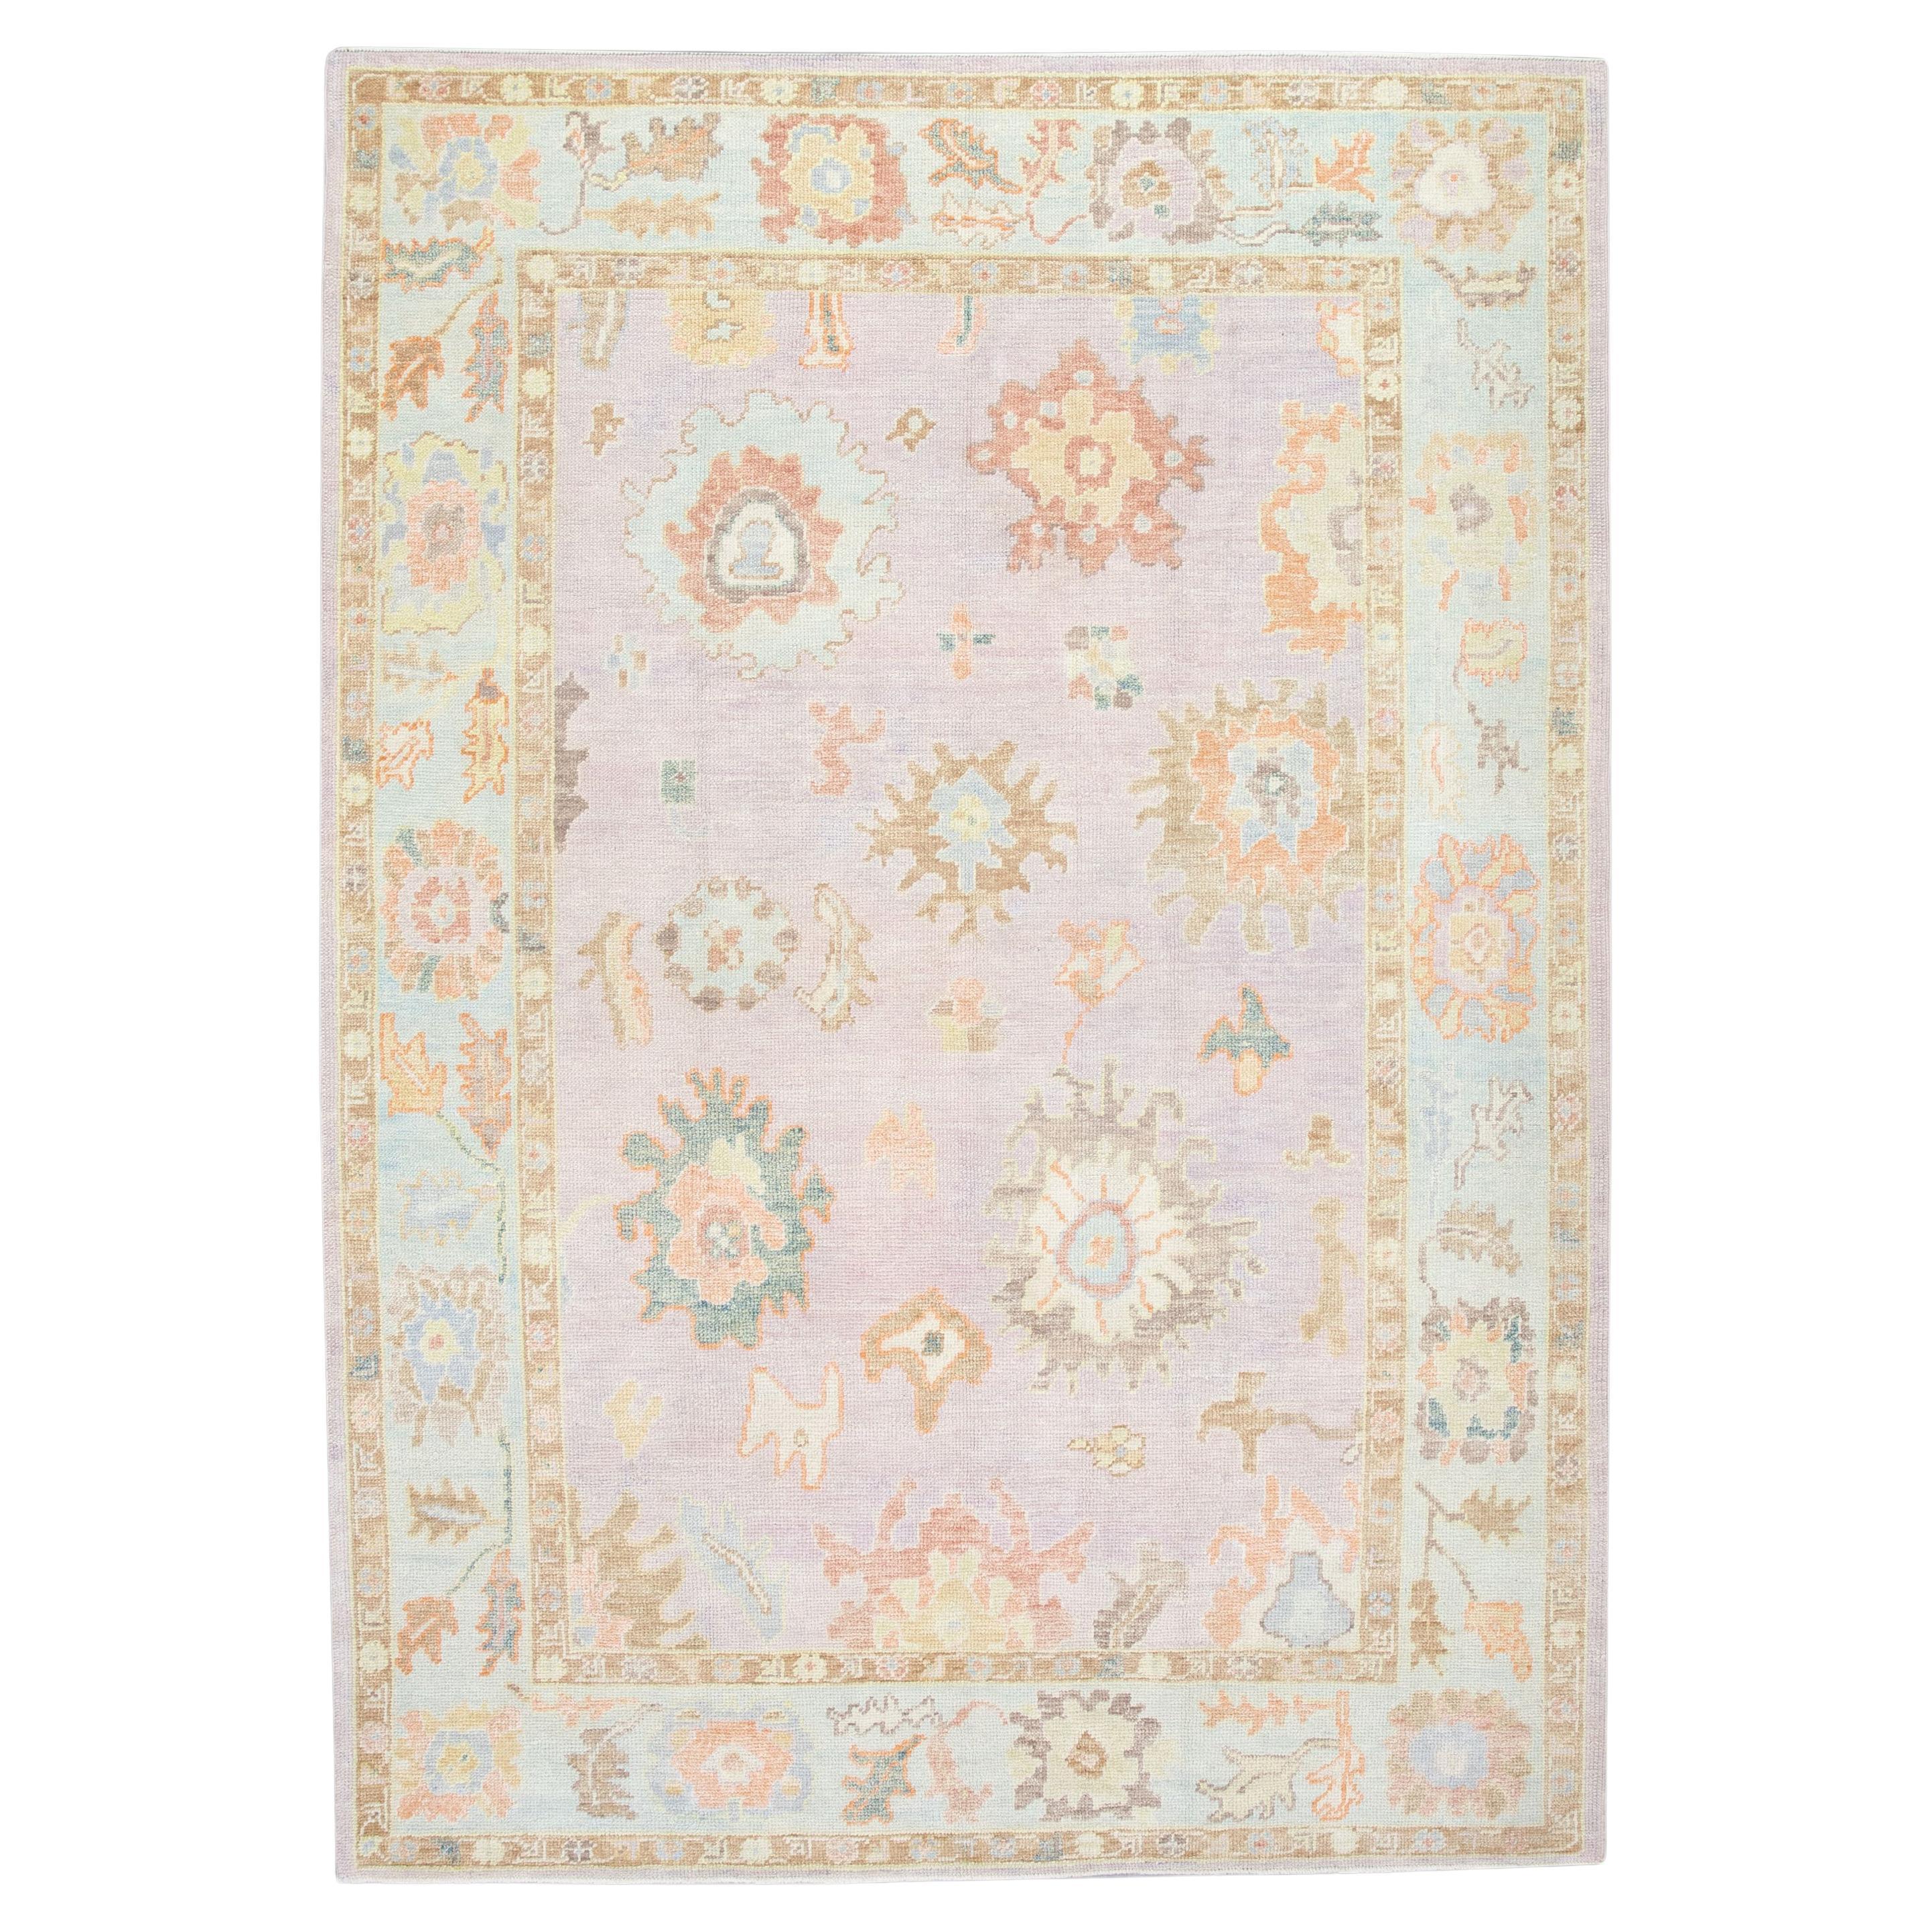 Pink and Blue Floral Design Handwoven Wool Turkish Oushak Rug 6'2" x 8'10" For Sale